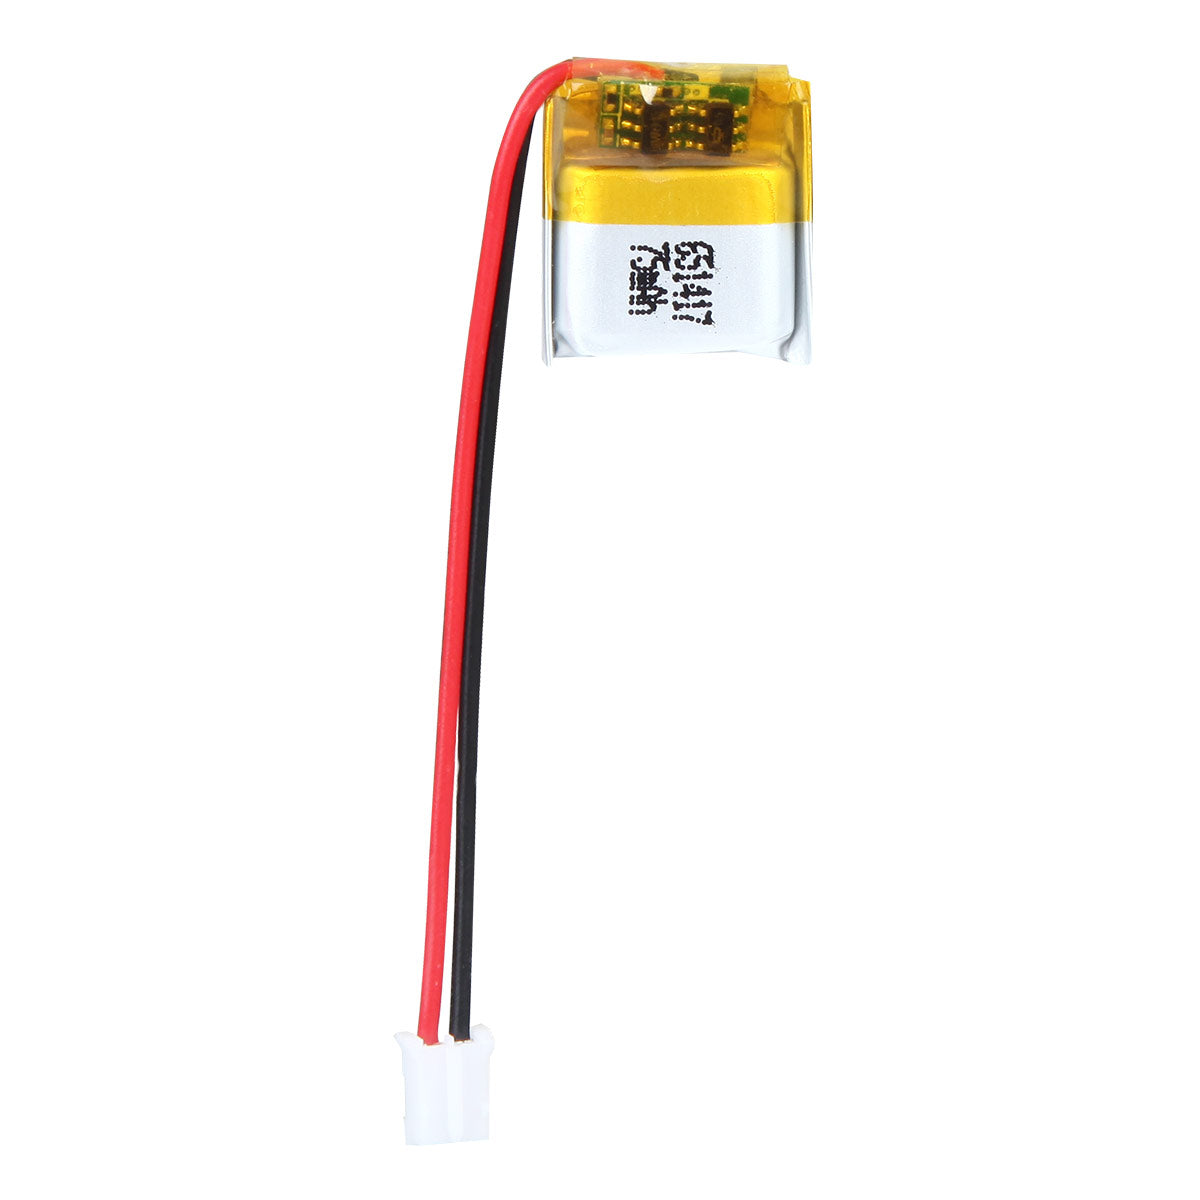 YDL 3.7V 75mAh 651417 Rechargeable Lithium  Polymer Battery